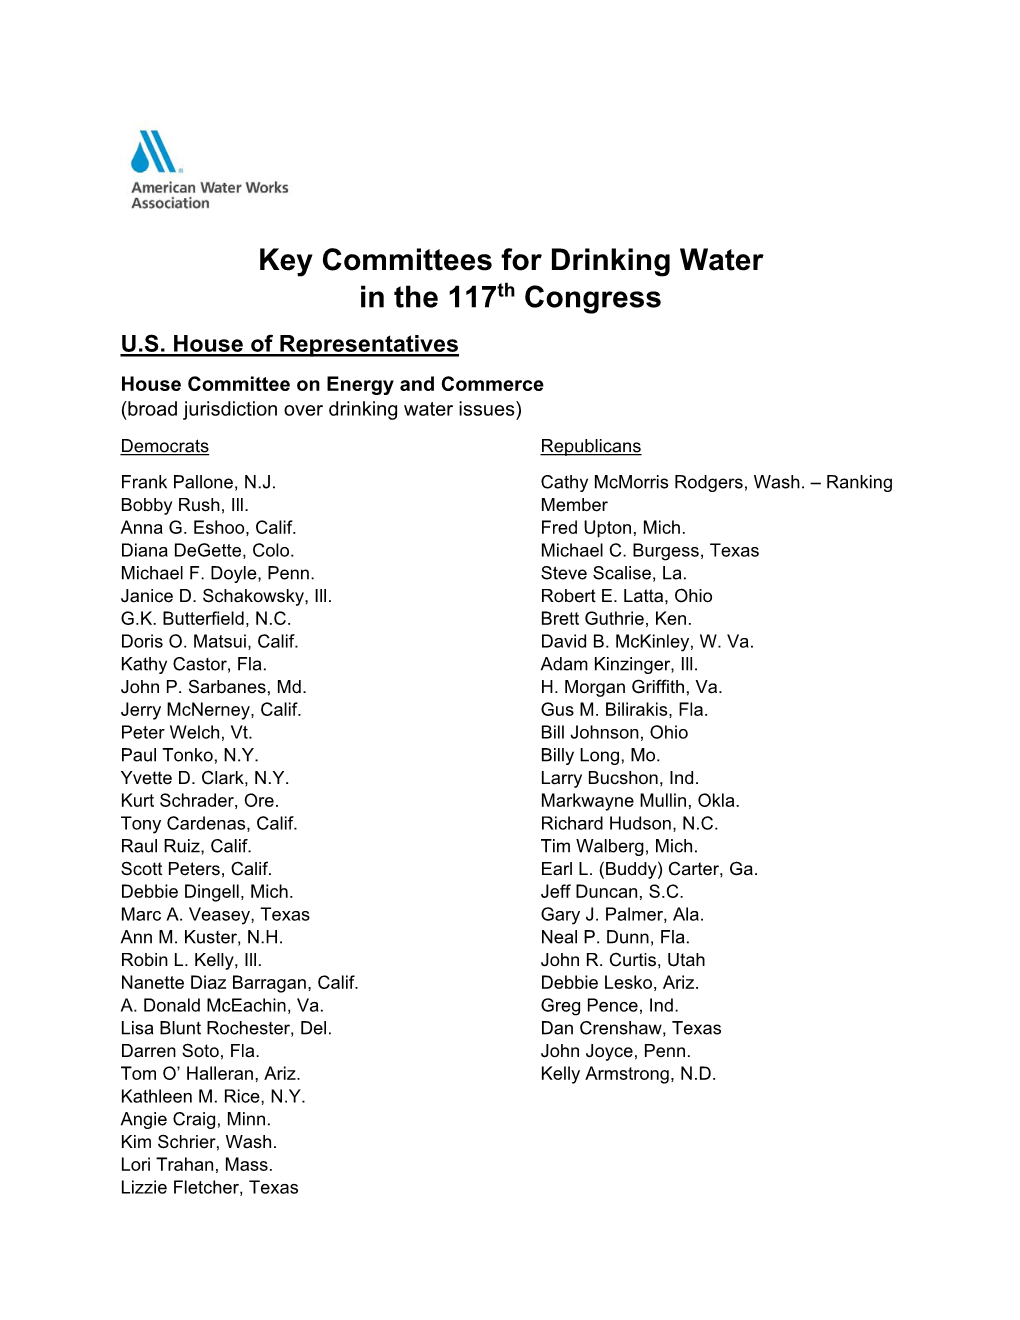 Key Committees for Drinking Water in the 117Th Congress U.S